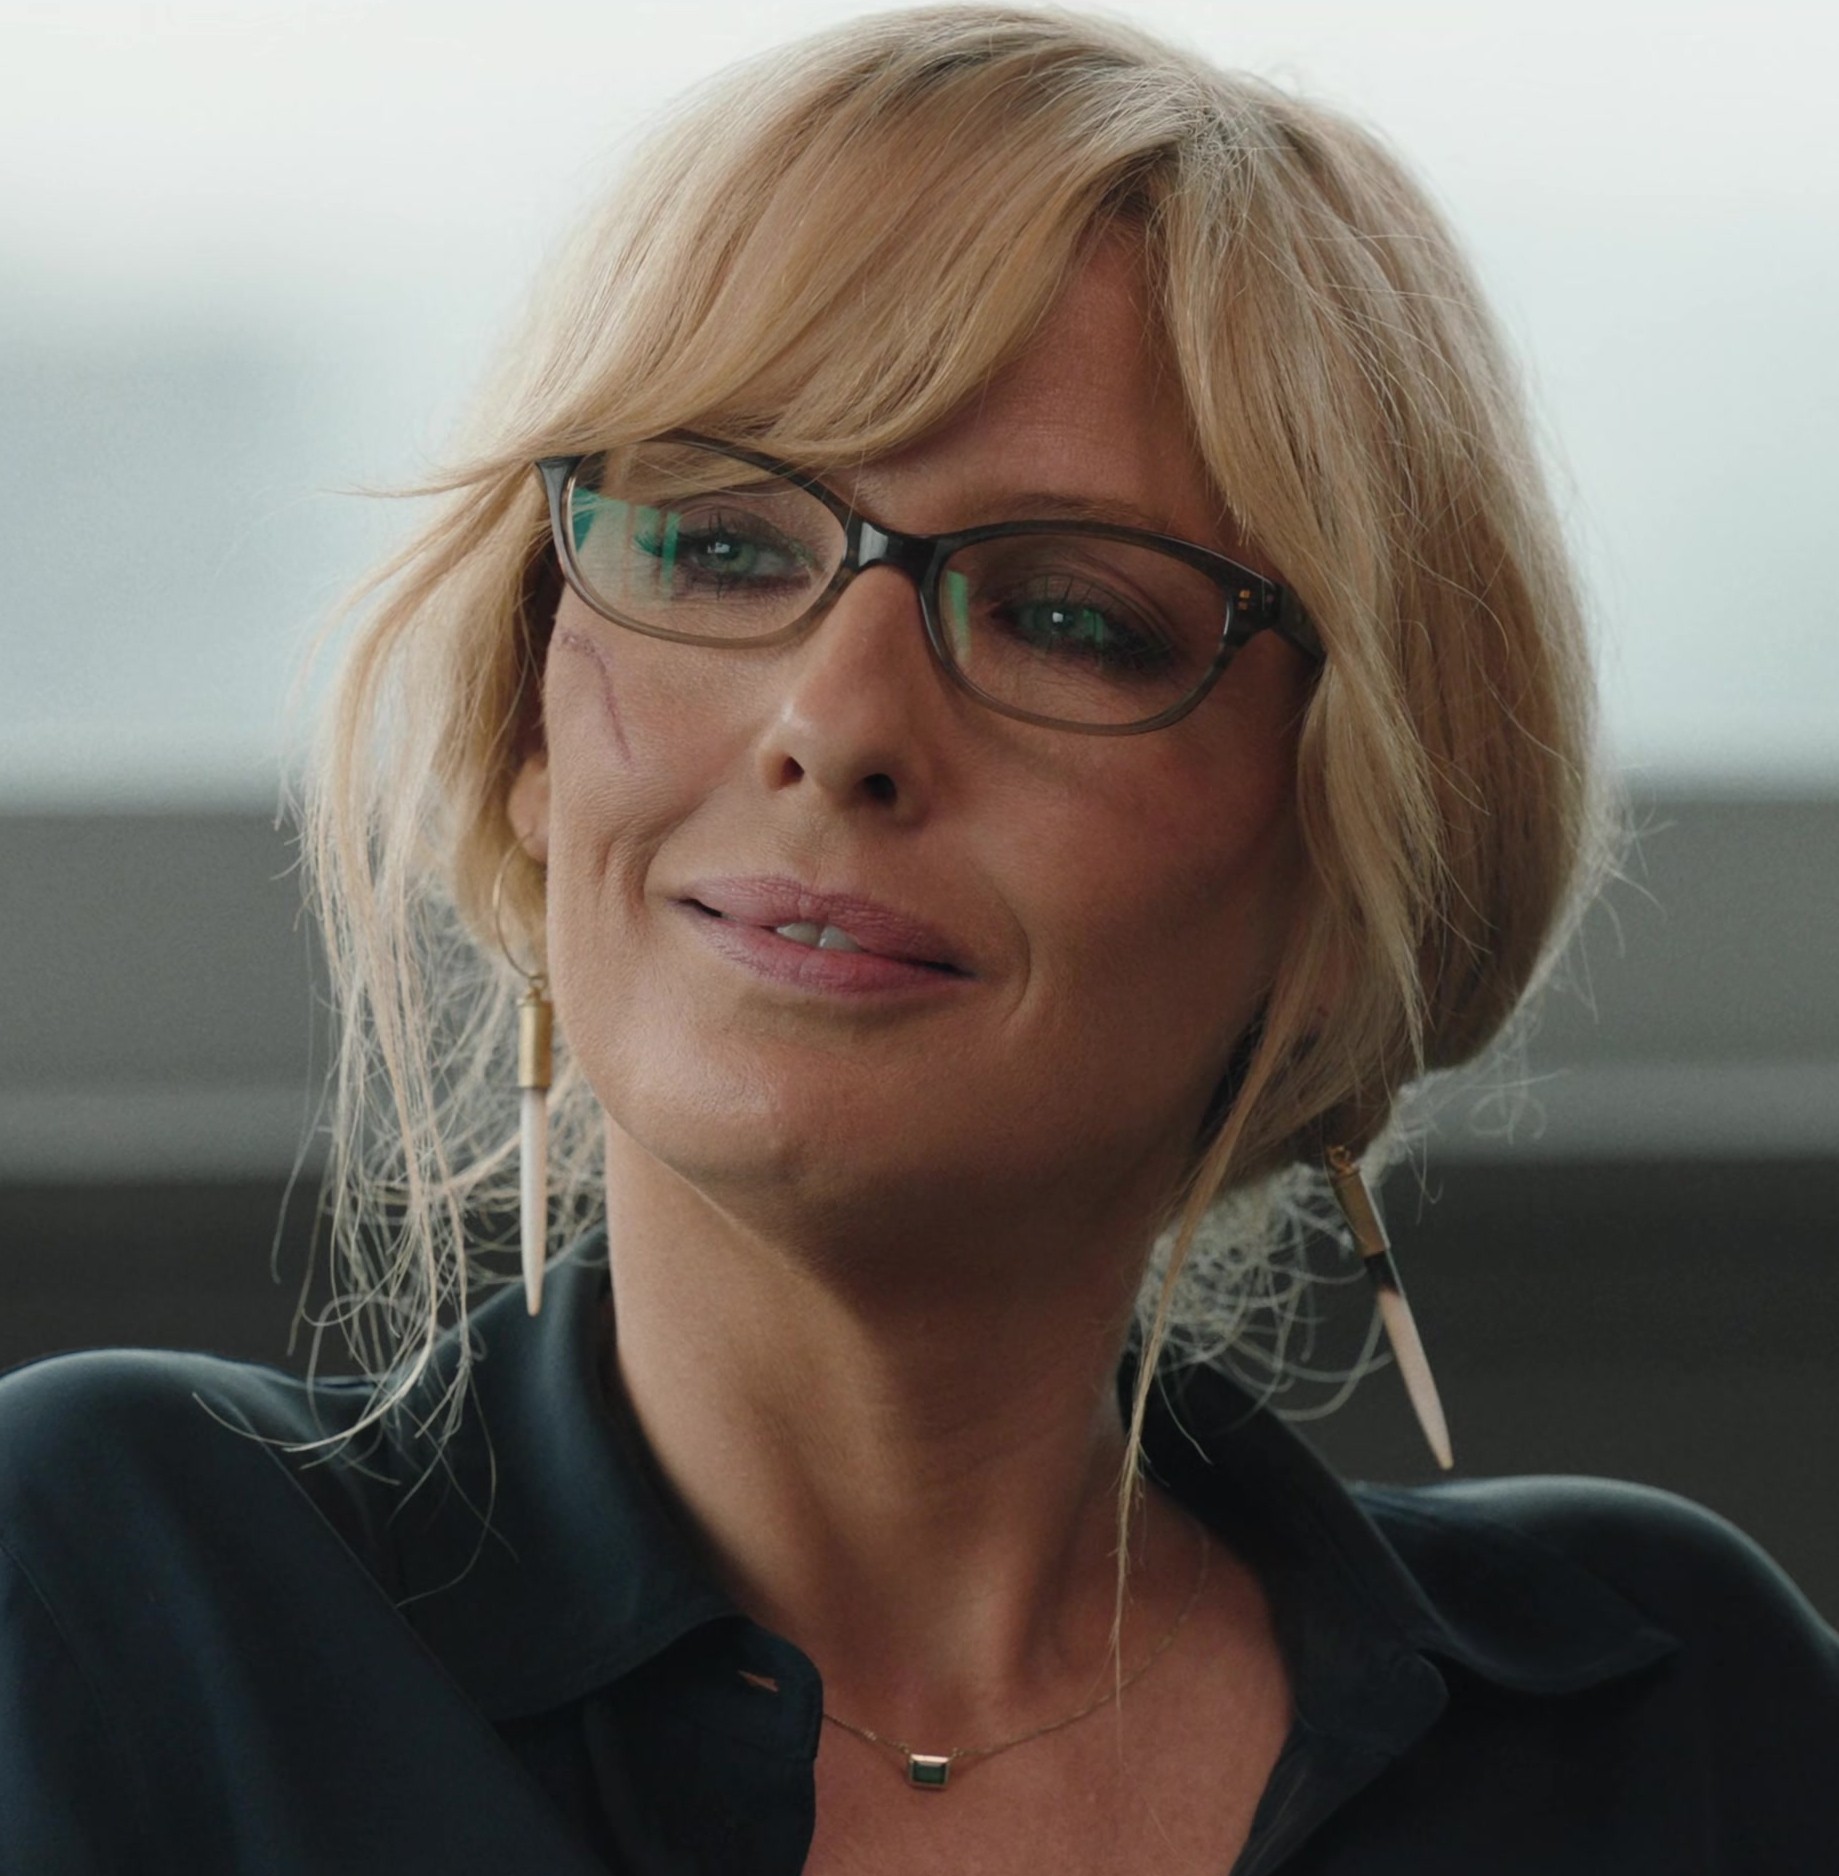 Worn on Yellowstone TV Show - Tortoiseshell Optical Glasses of Kelly Reilly as Bethany "Beth" Dutton